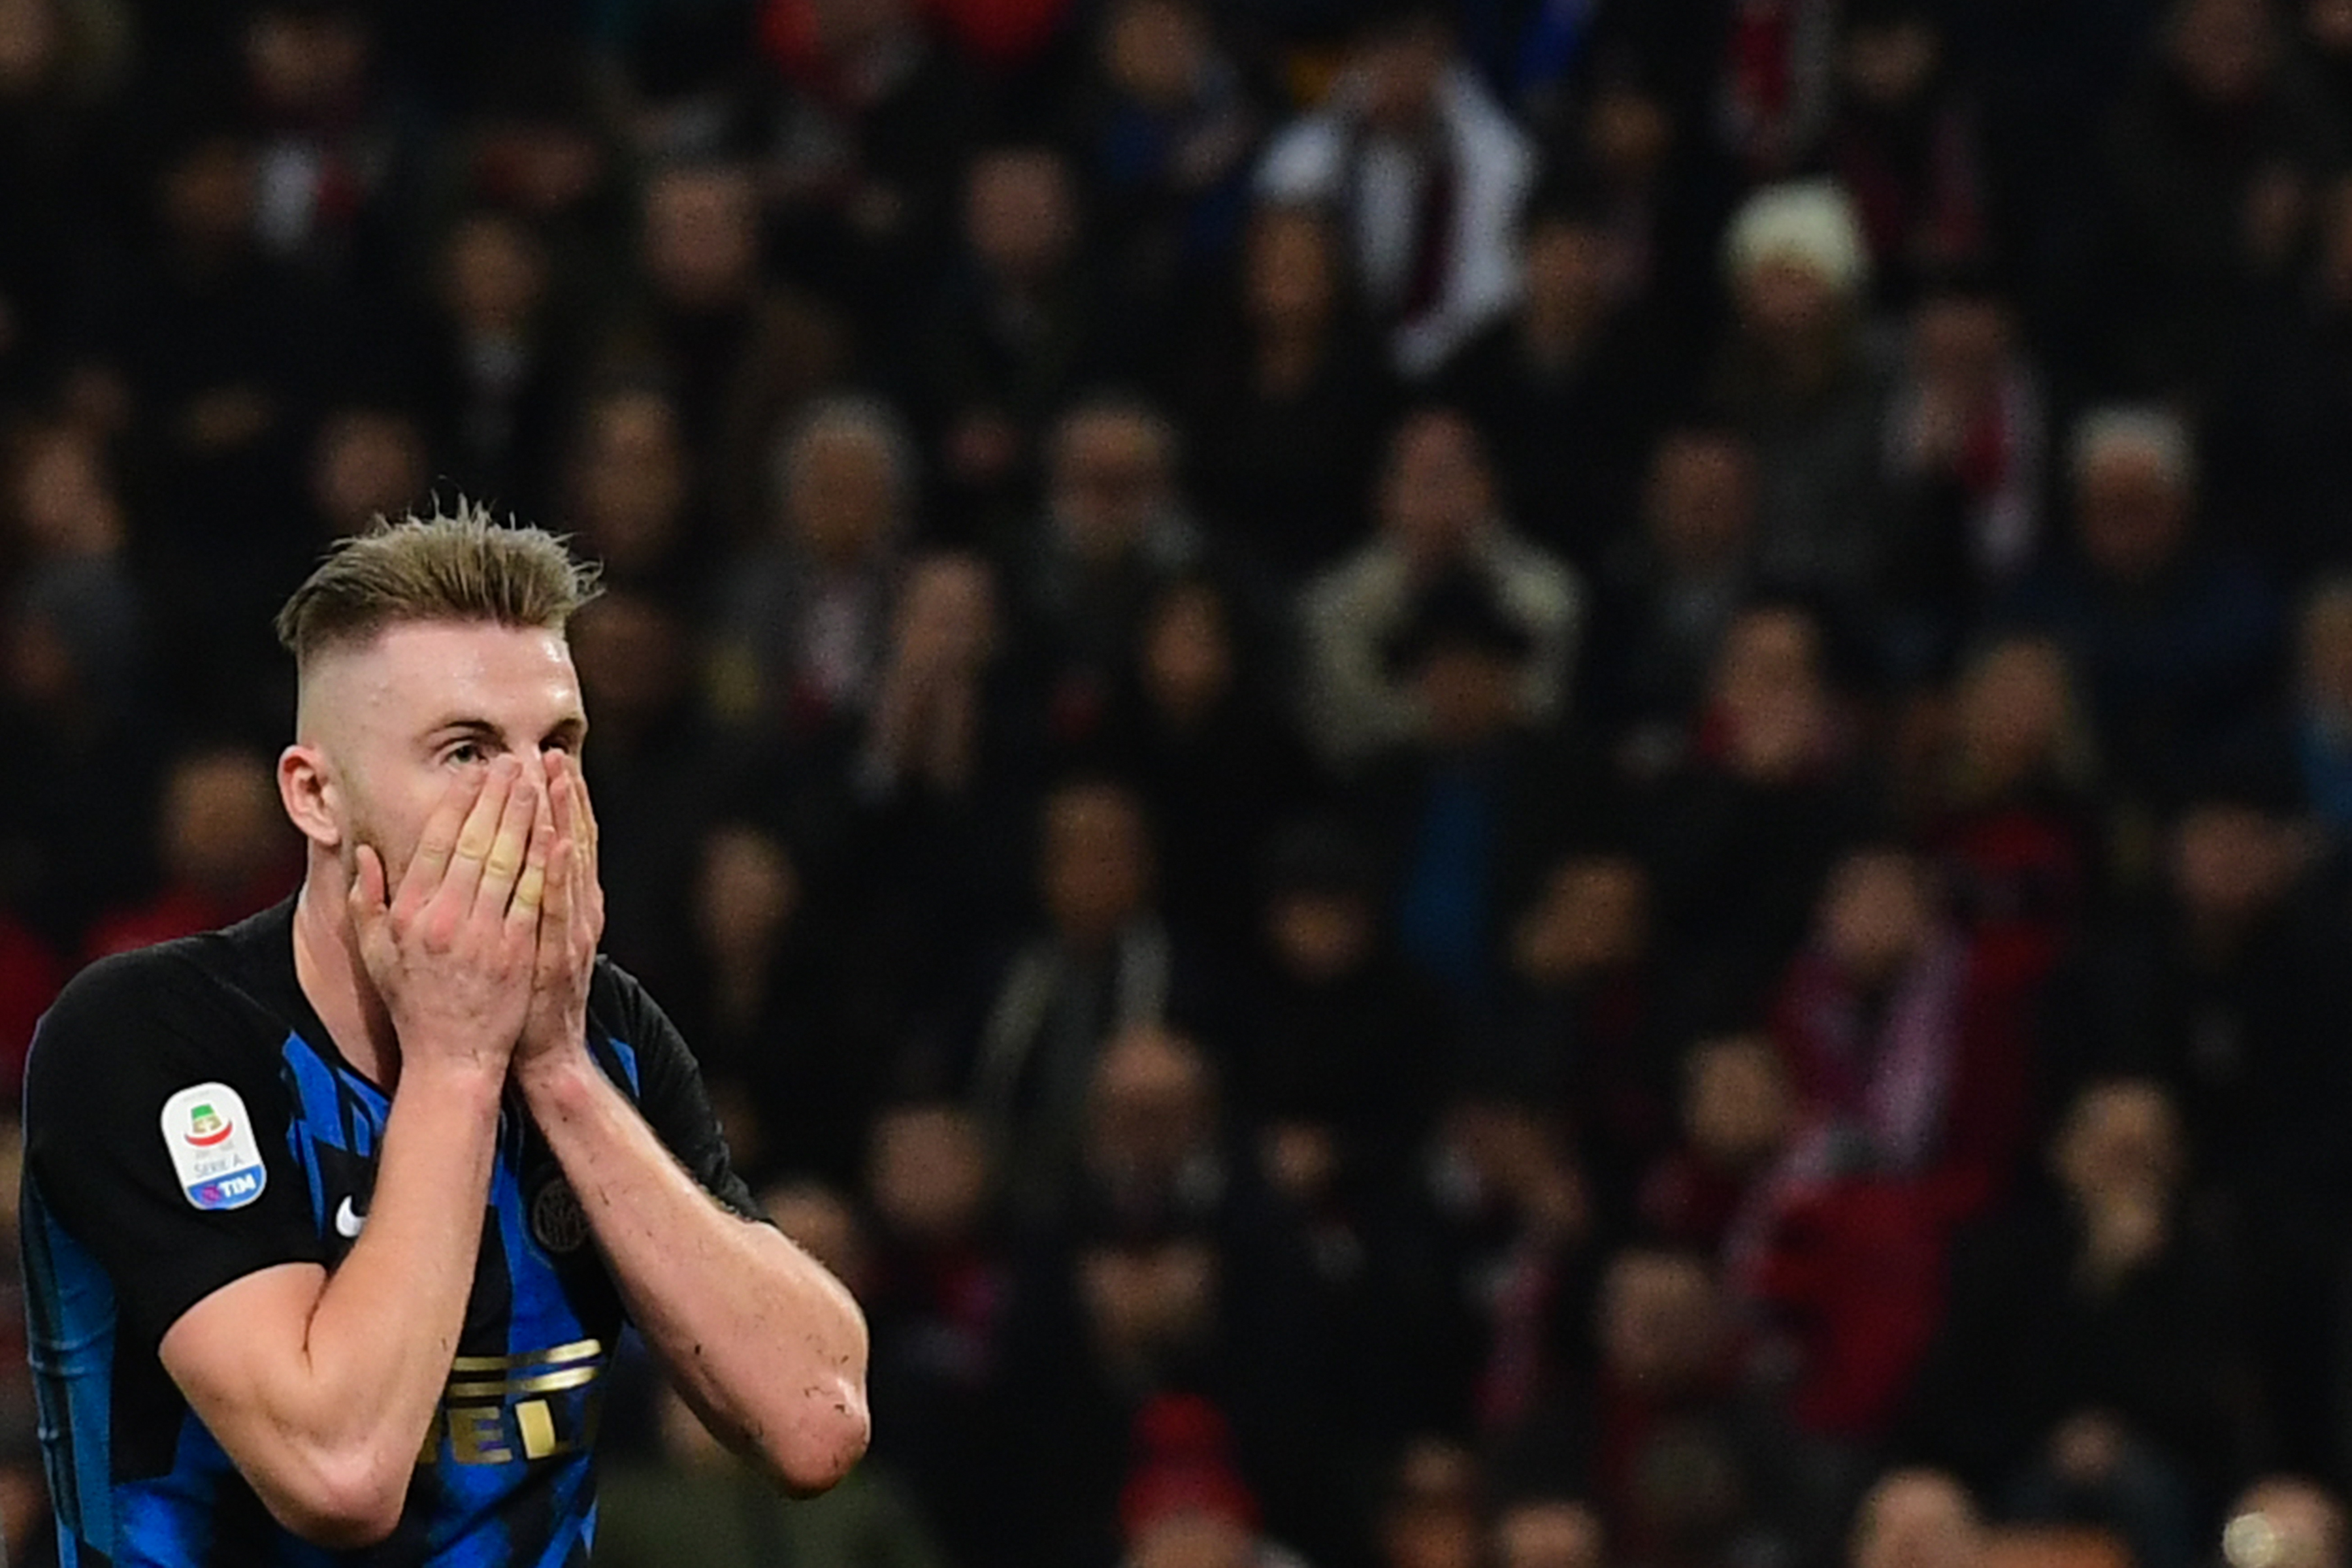 Inter Milan's Slovak defender Milan Skriniar reacts after missing a goal during the Italian Serie A football match AC Milan vs Inter Milan at the San Siro stadium in Milan on March 17, 2019. (Photo by Miguel MEDINA / AFP)        (Photo credit should read MIGUEL MEDINA/AFP/Getty Images)